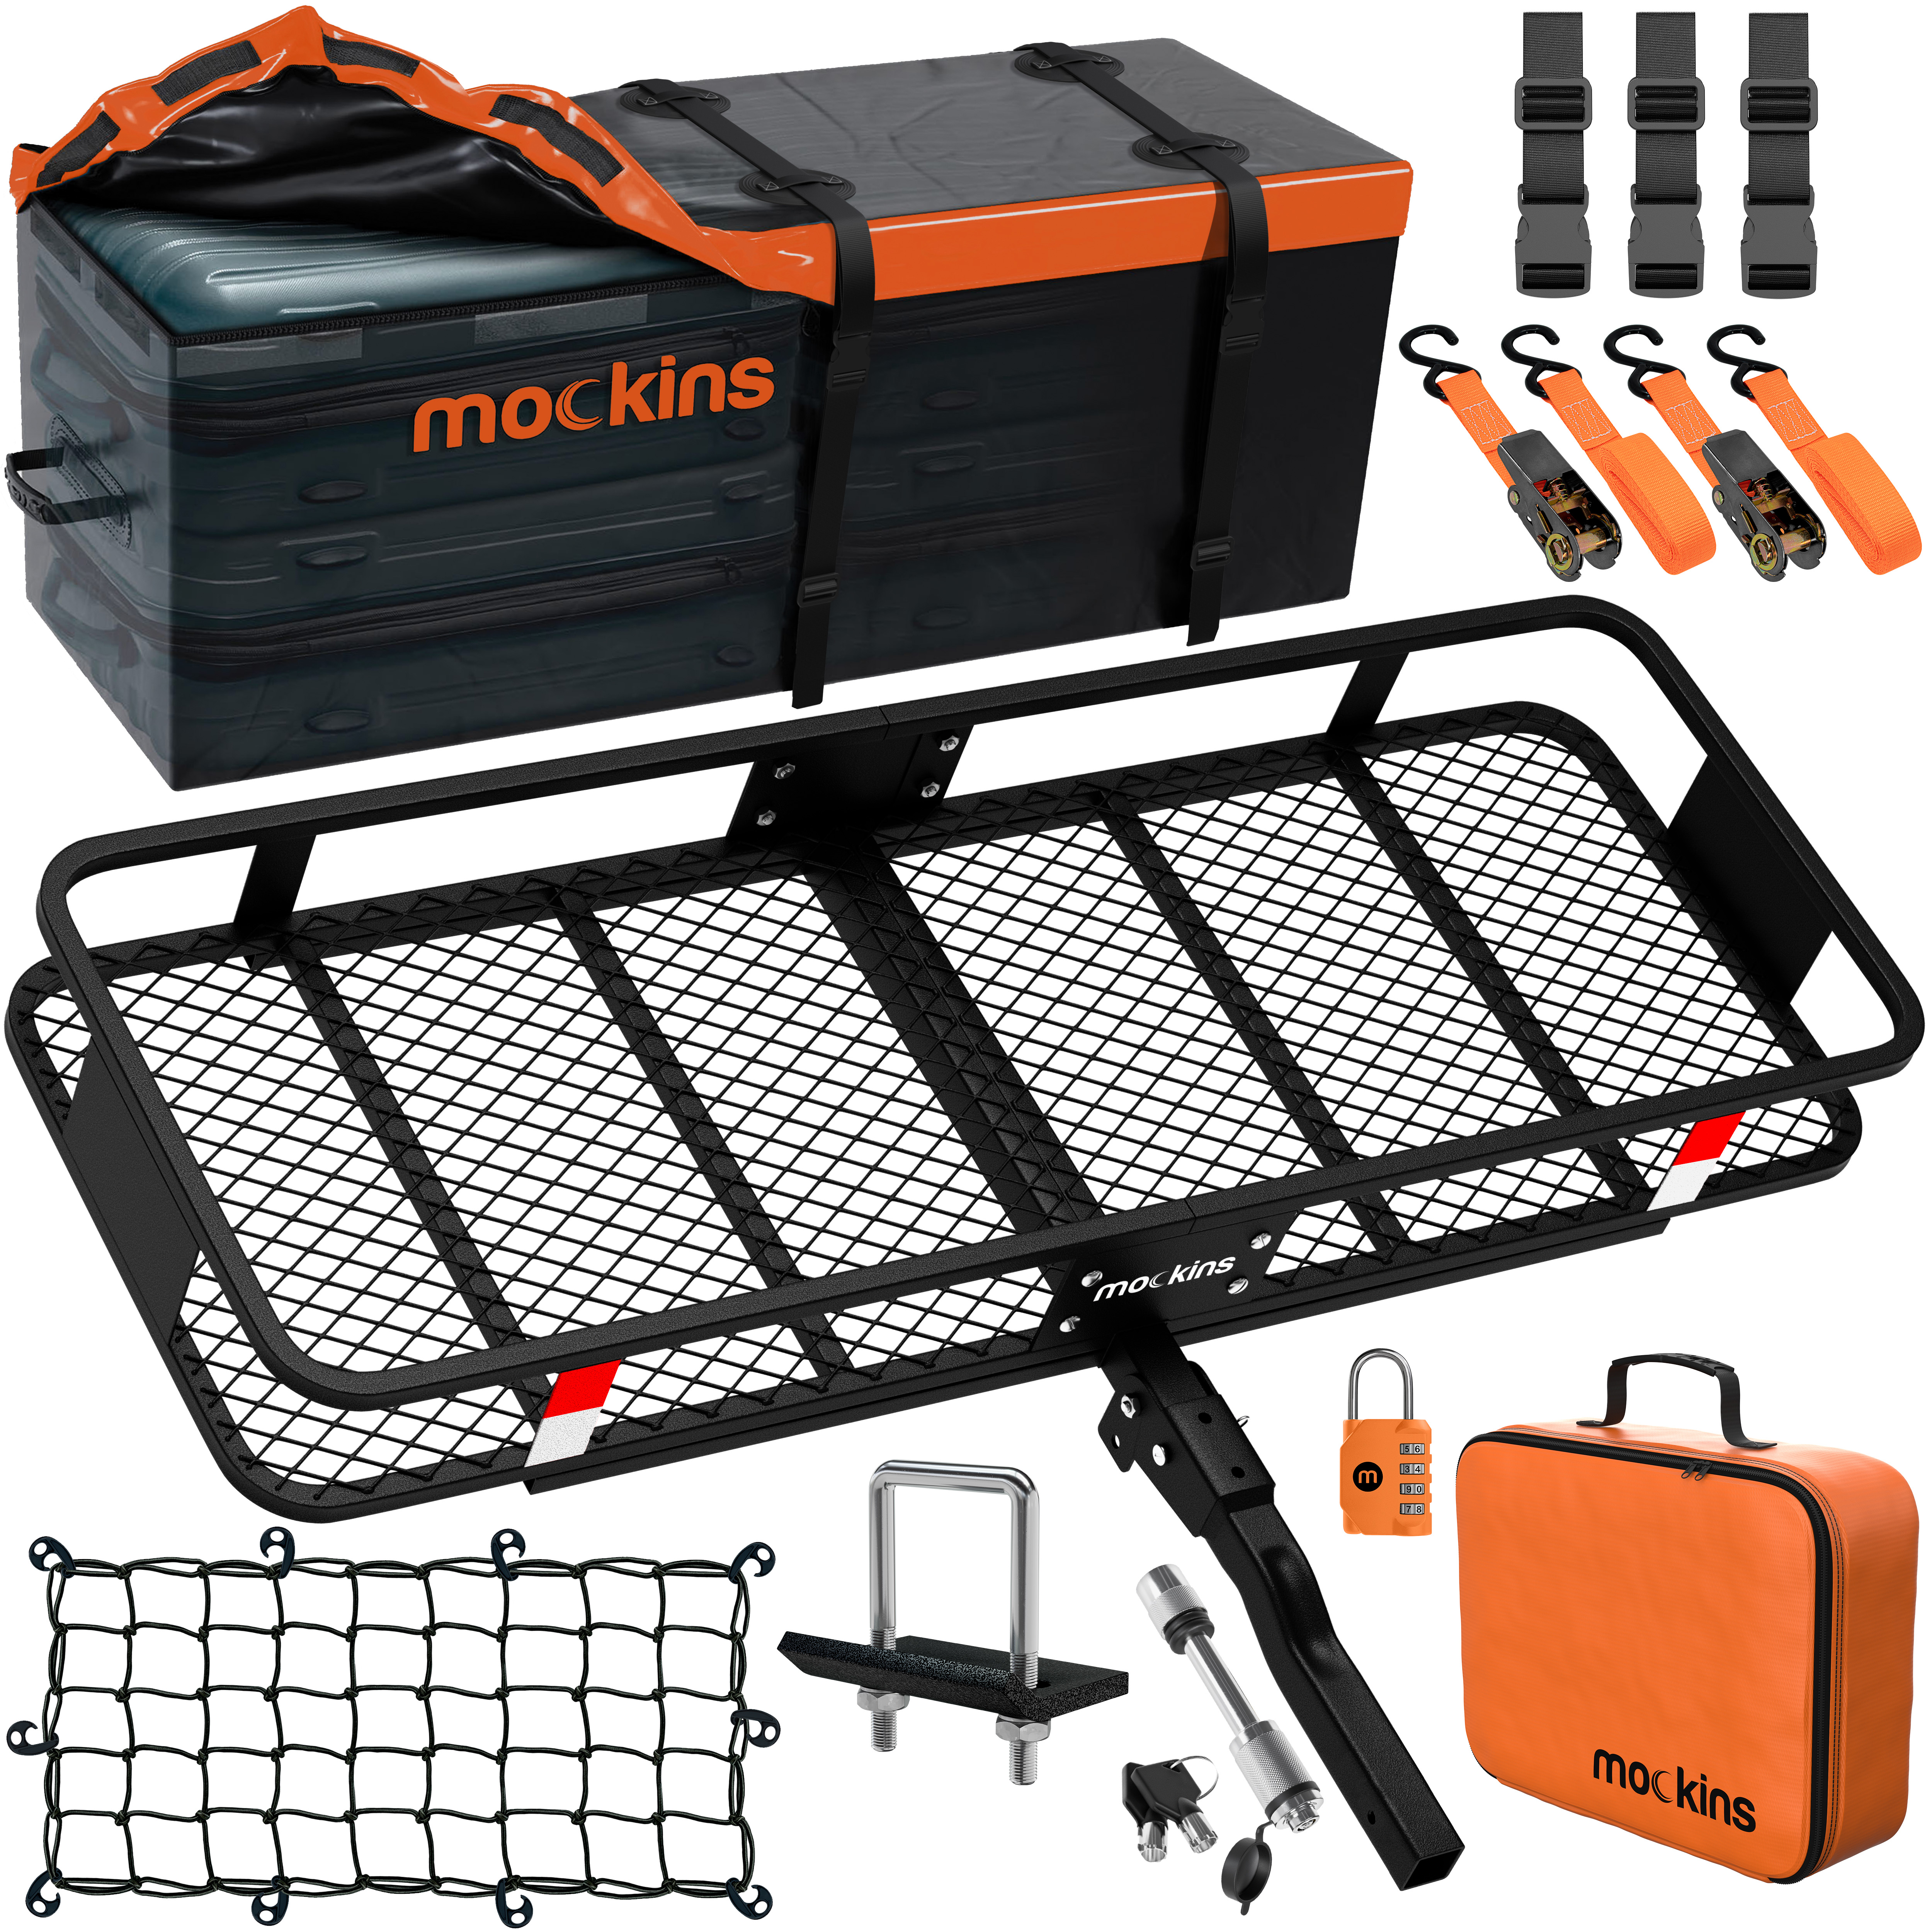 mockins Rust Proofed Foldable Hitch Basket 60"L x 20"W x 6"H and 16 Cu.Ft. Waterproof Cargo Bag - 500lb Cap. + Locks, Stabilizer and Net